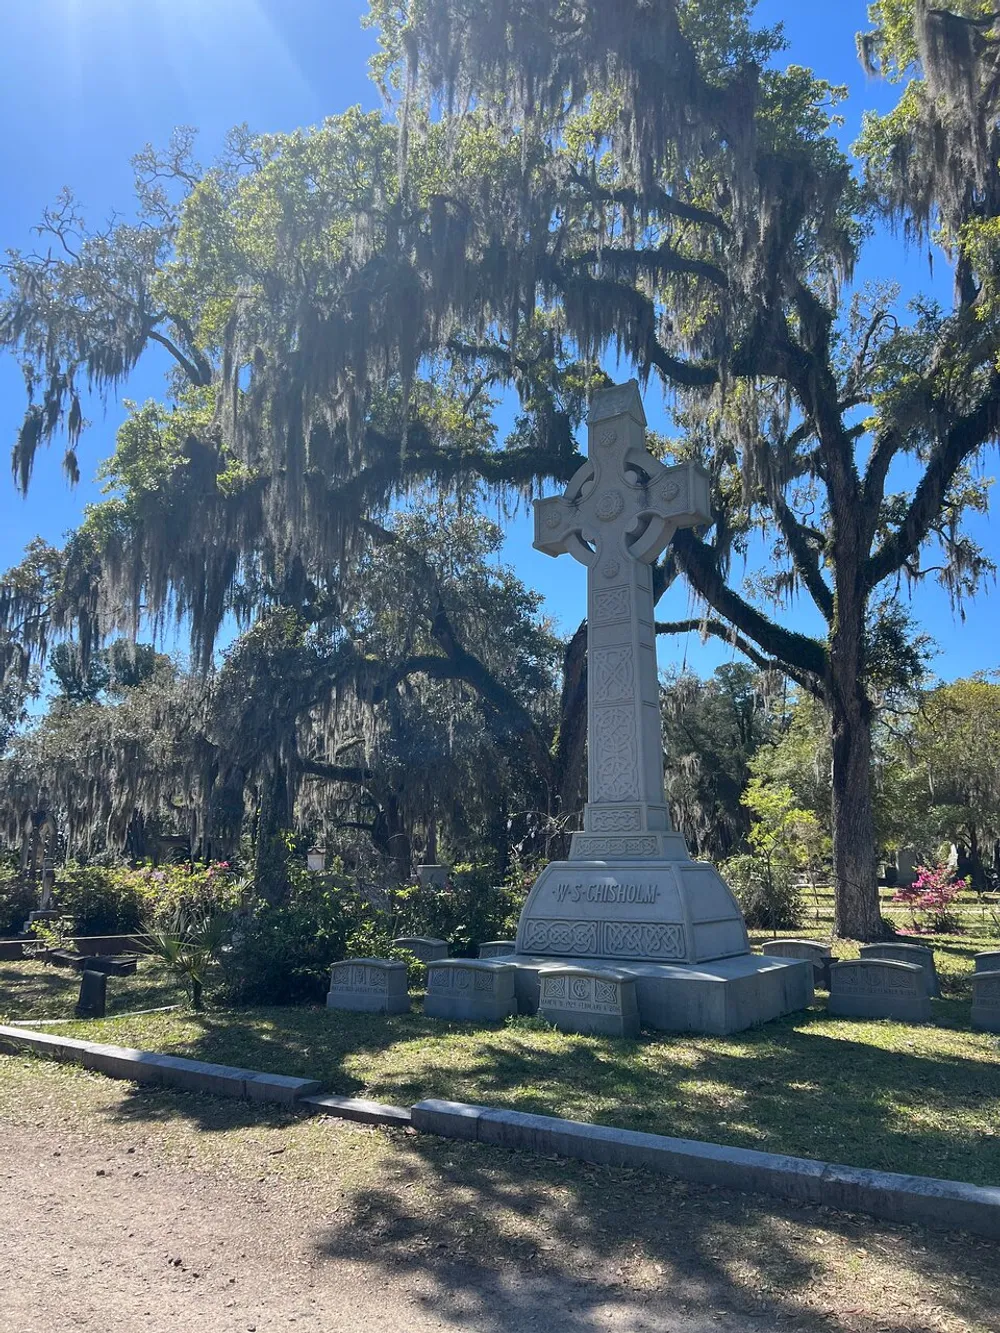 The image shows a tall ornate cross gravestone in a cemetery with Spanish moss-draped trees in the background under a clear blue sky